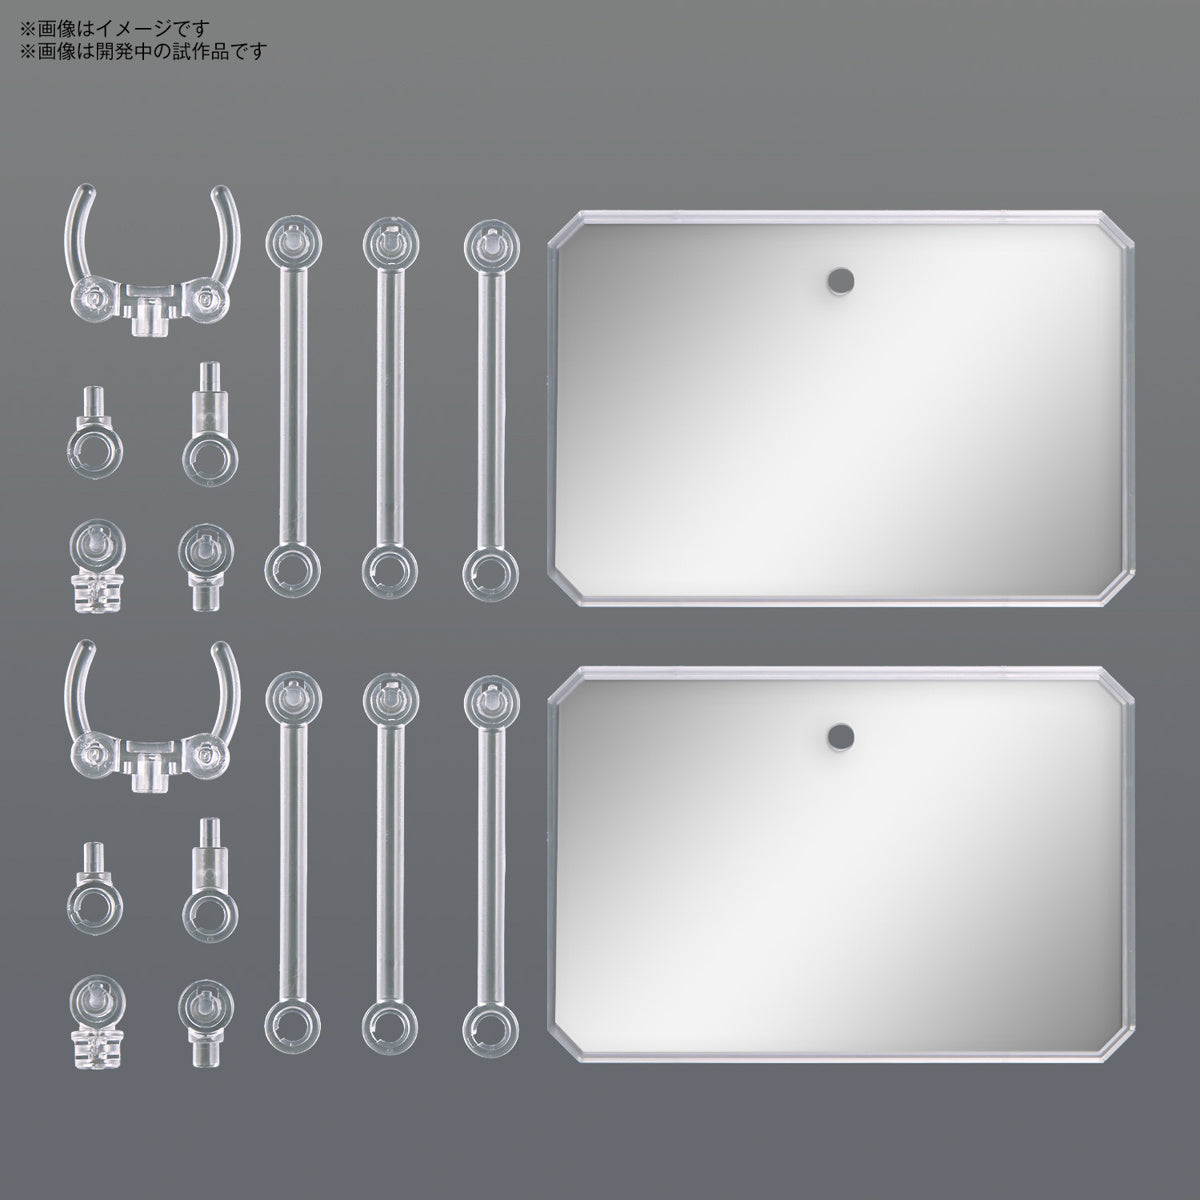 Gundam Action Base 6 Clear Mirror Stickers Set Stand Model Kit